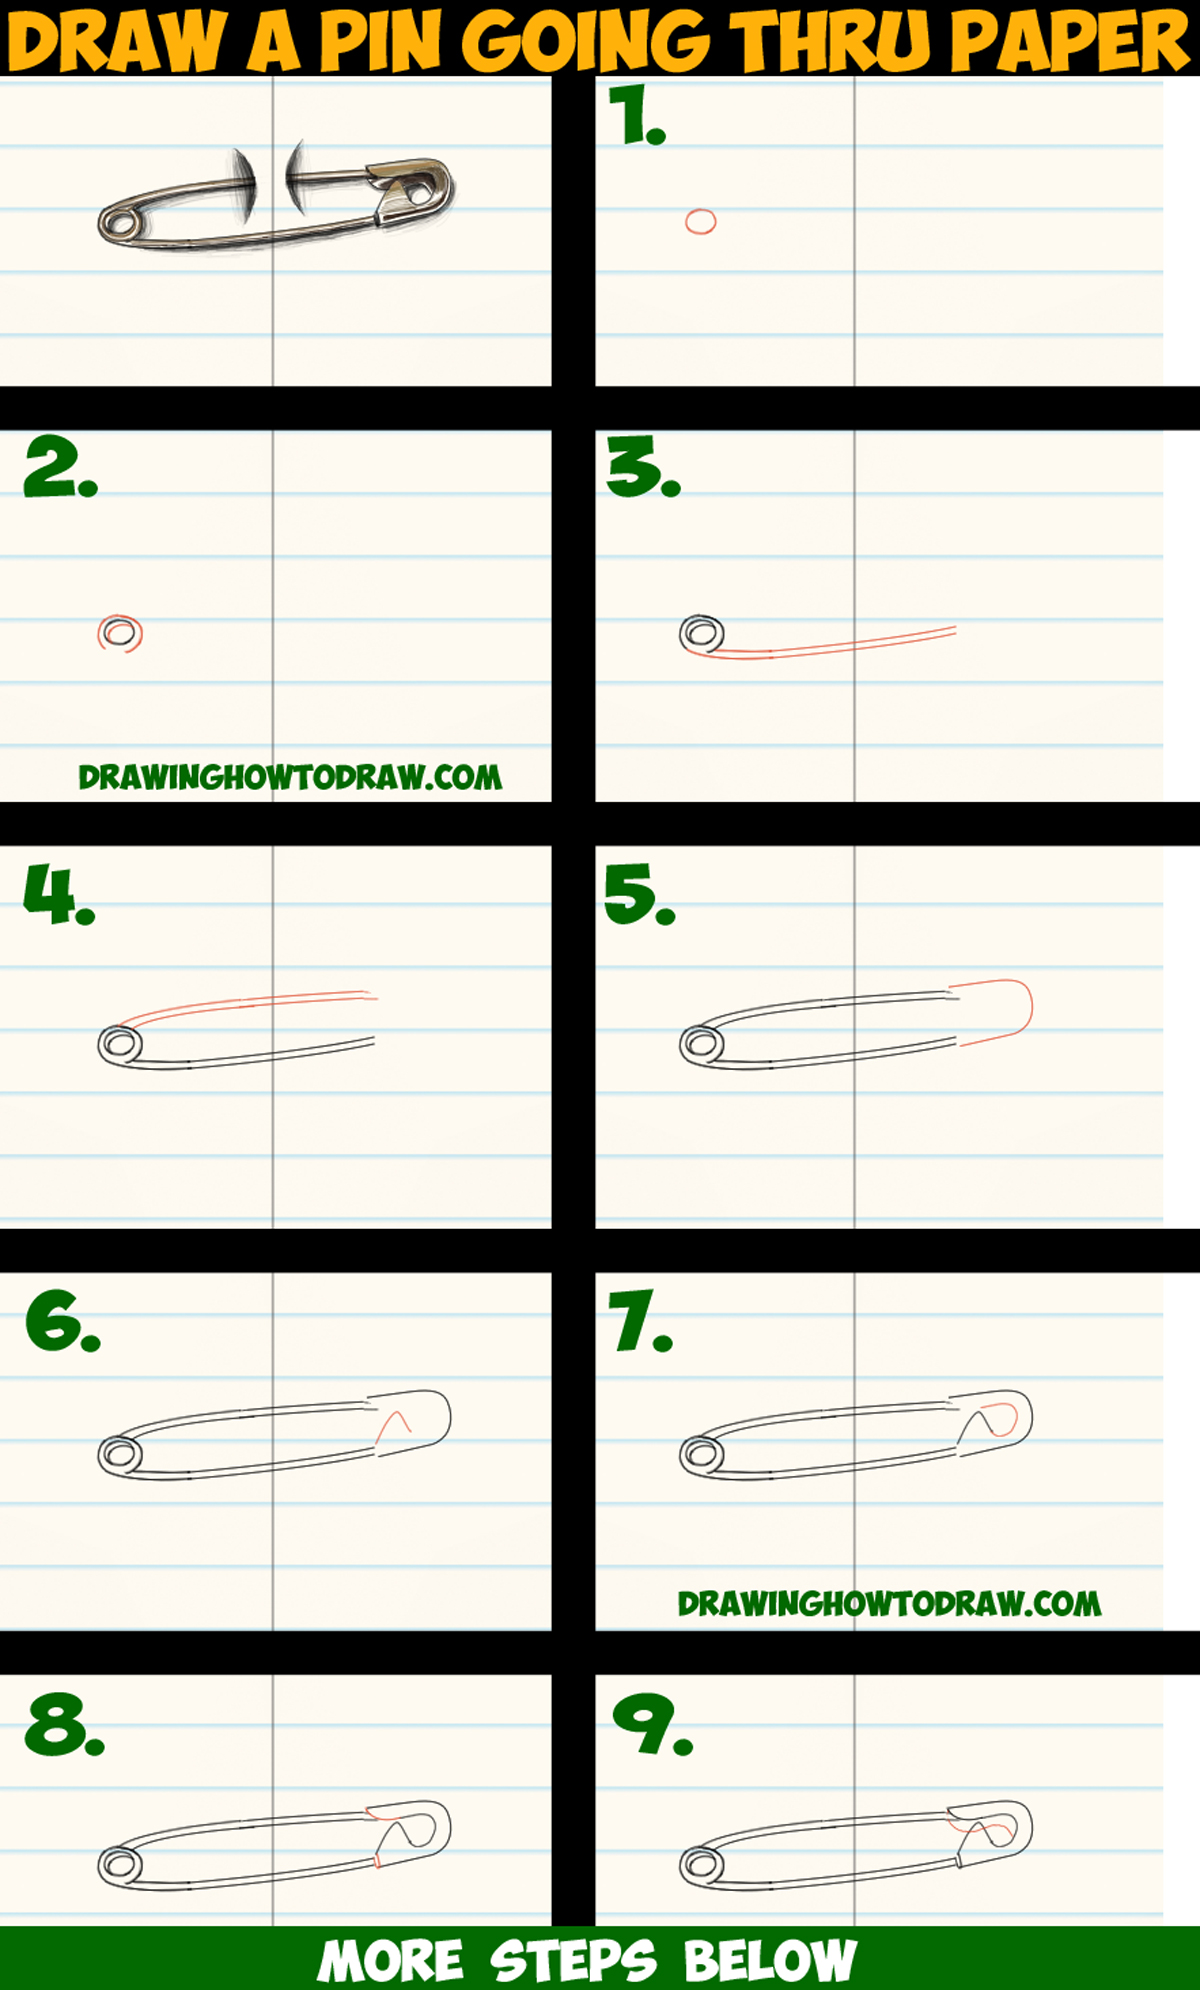 How to Draw Cool Stuff Draw a Safety Pin Holding 2 Pieces of Paper